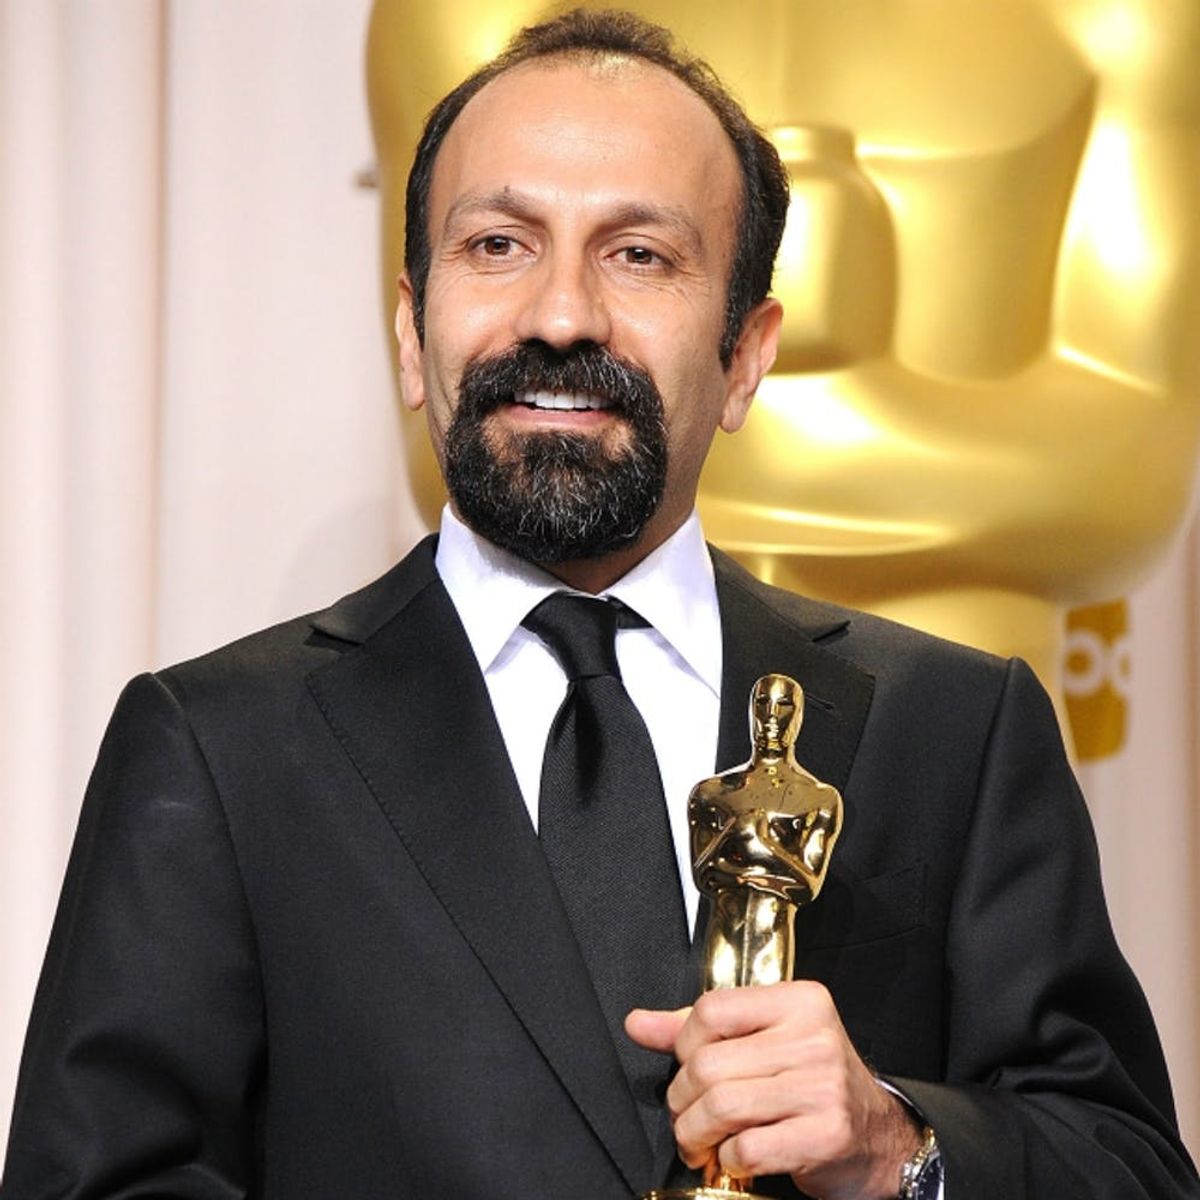 This Oscar-Nominated Director Won’t Be Able to Attend the Awards Due to Trump’s Travel Ban